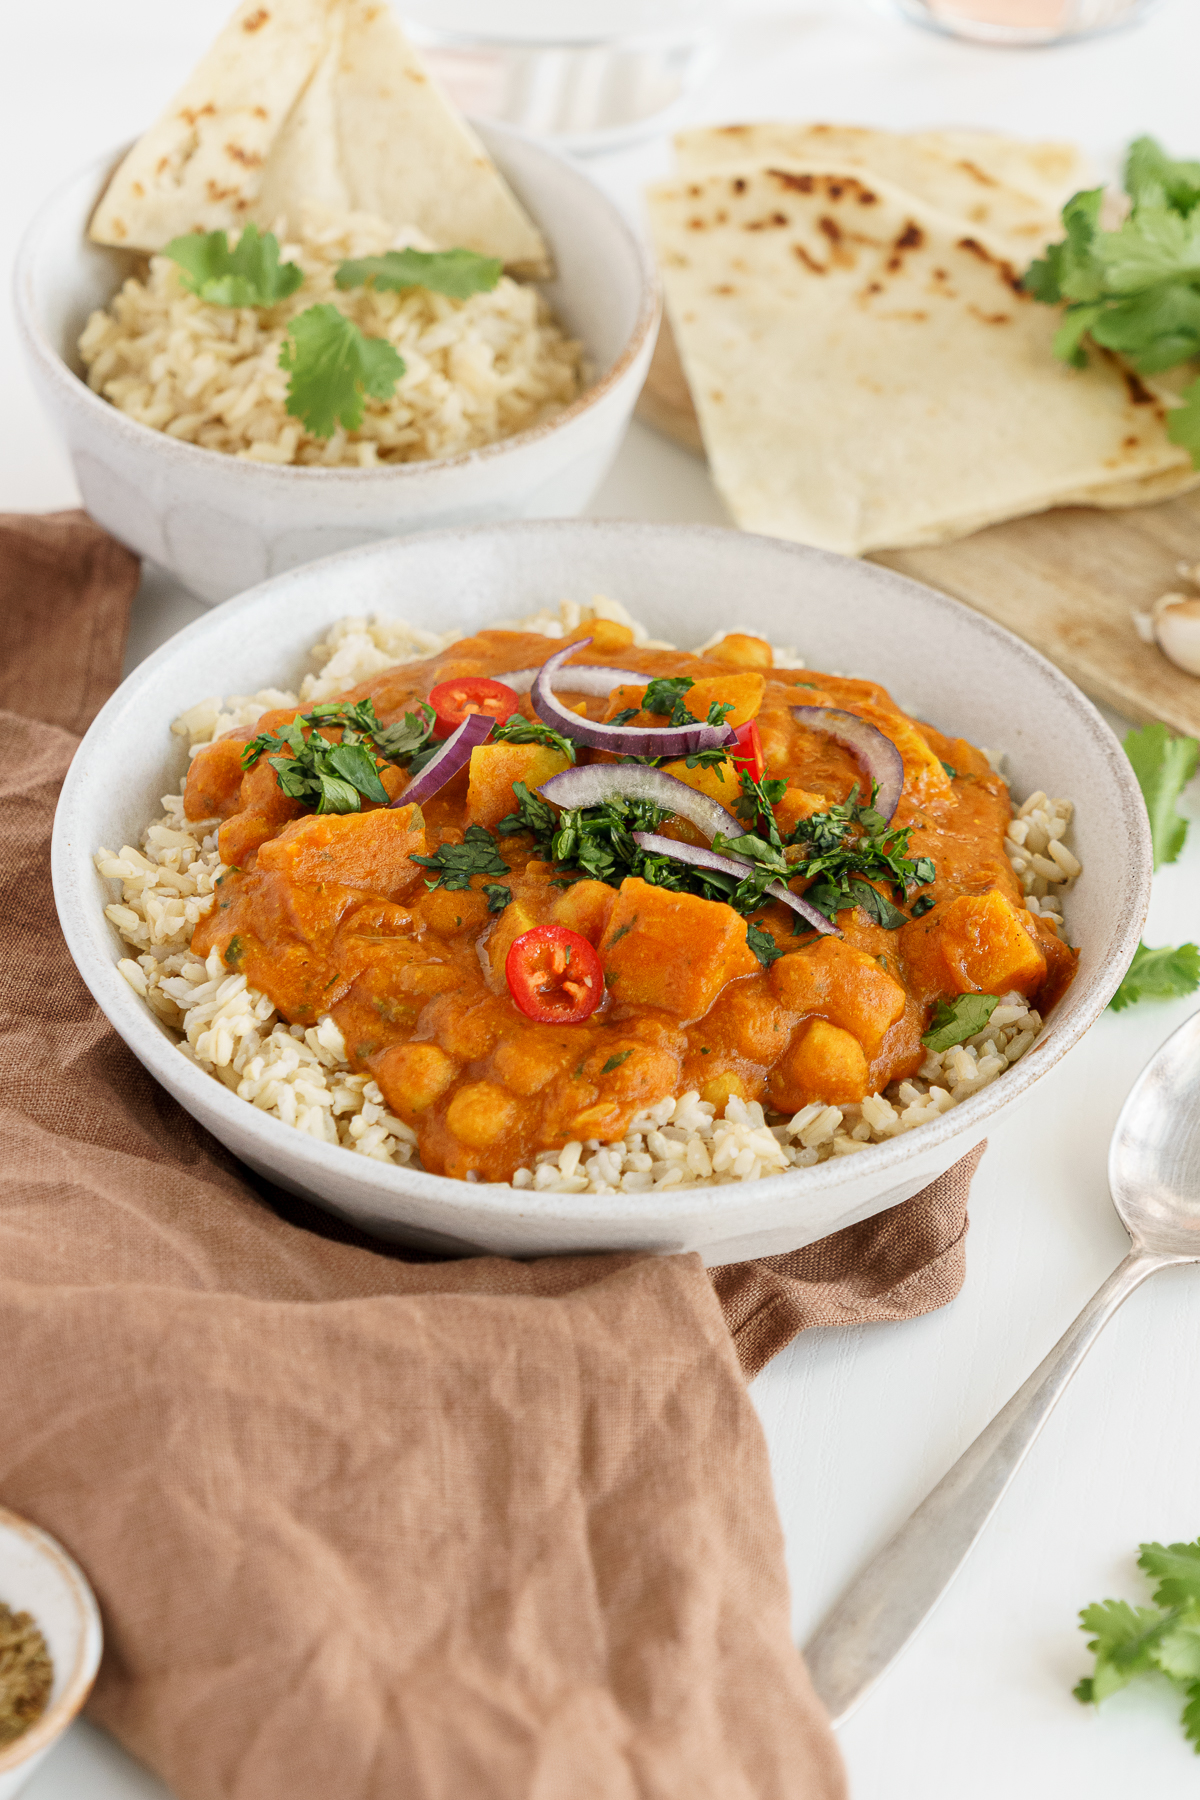 Chana aloo, chickpea potato curry in a bowl on the table with rice.